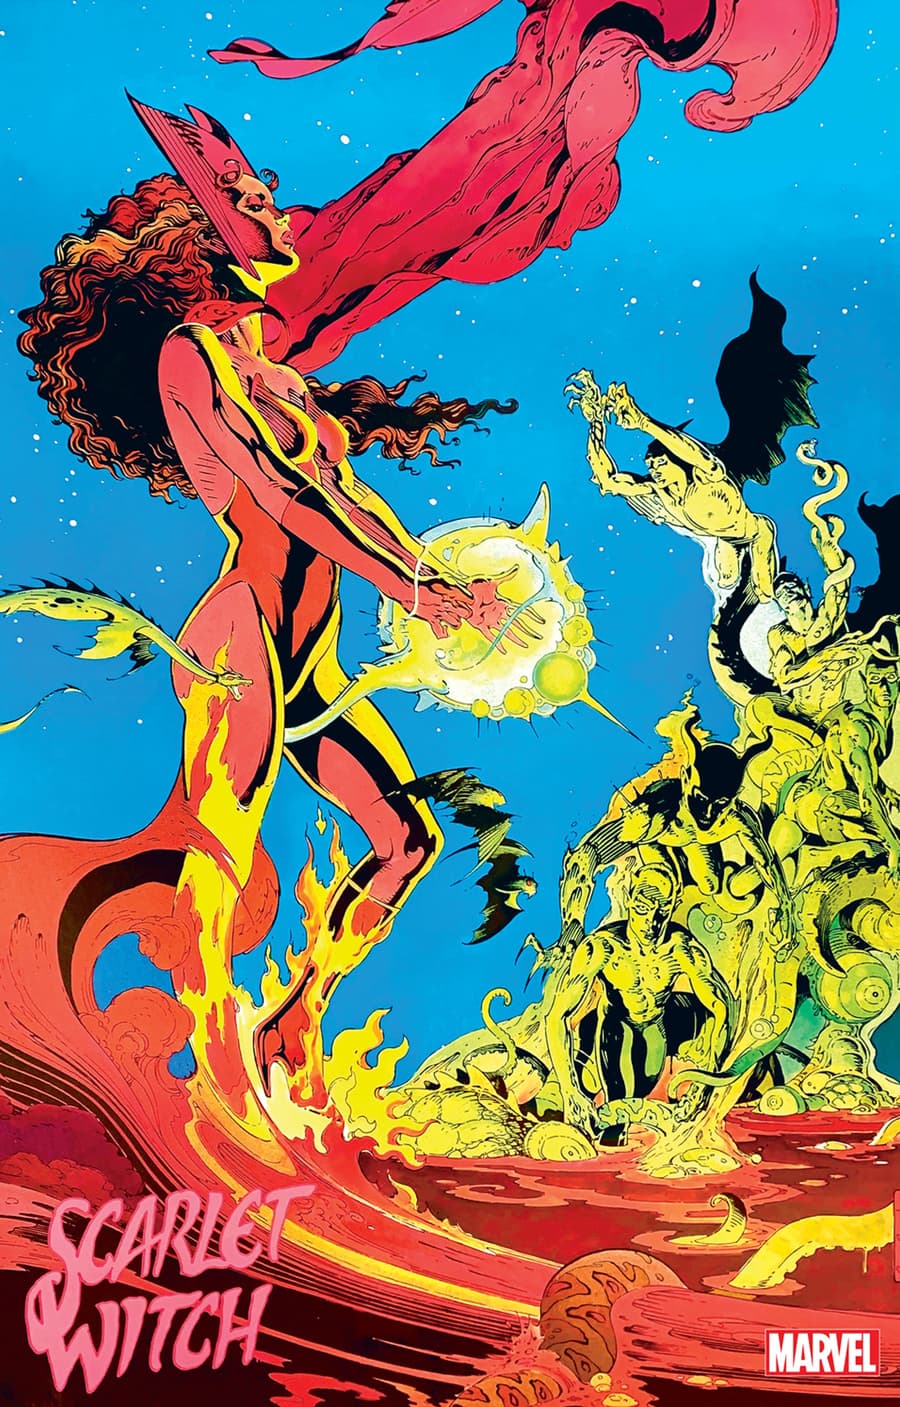 SCARLET WITCH #1 Hidden Gem Foil Variant Cover by P. Craig Russell